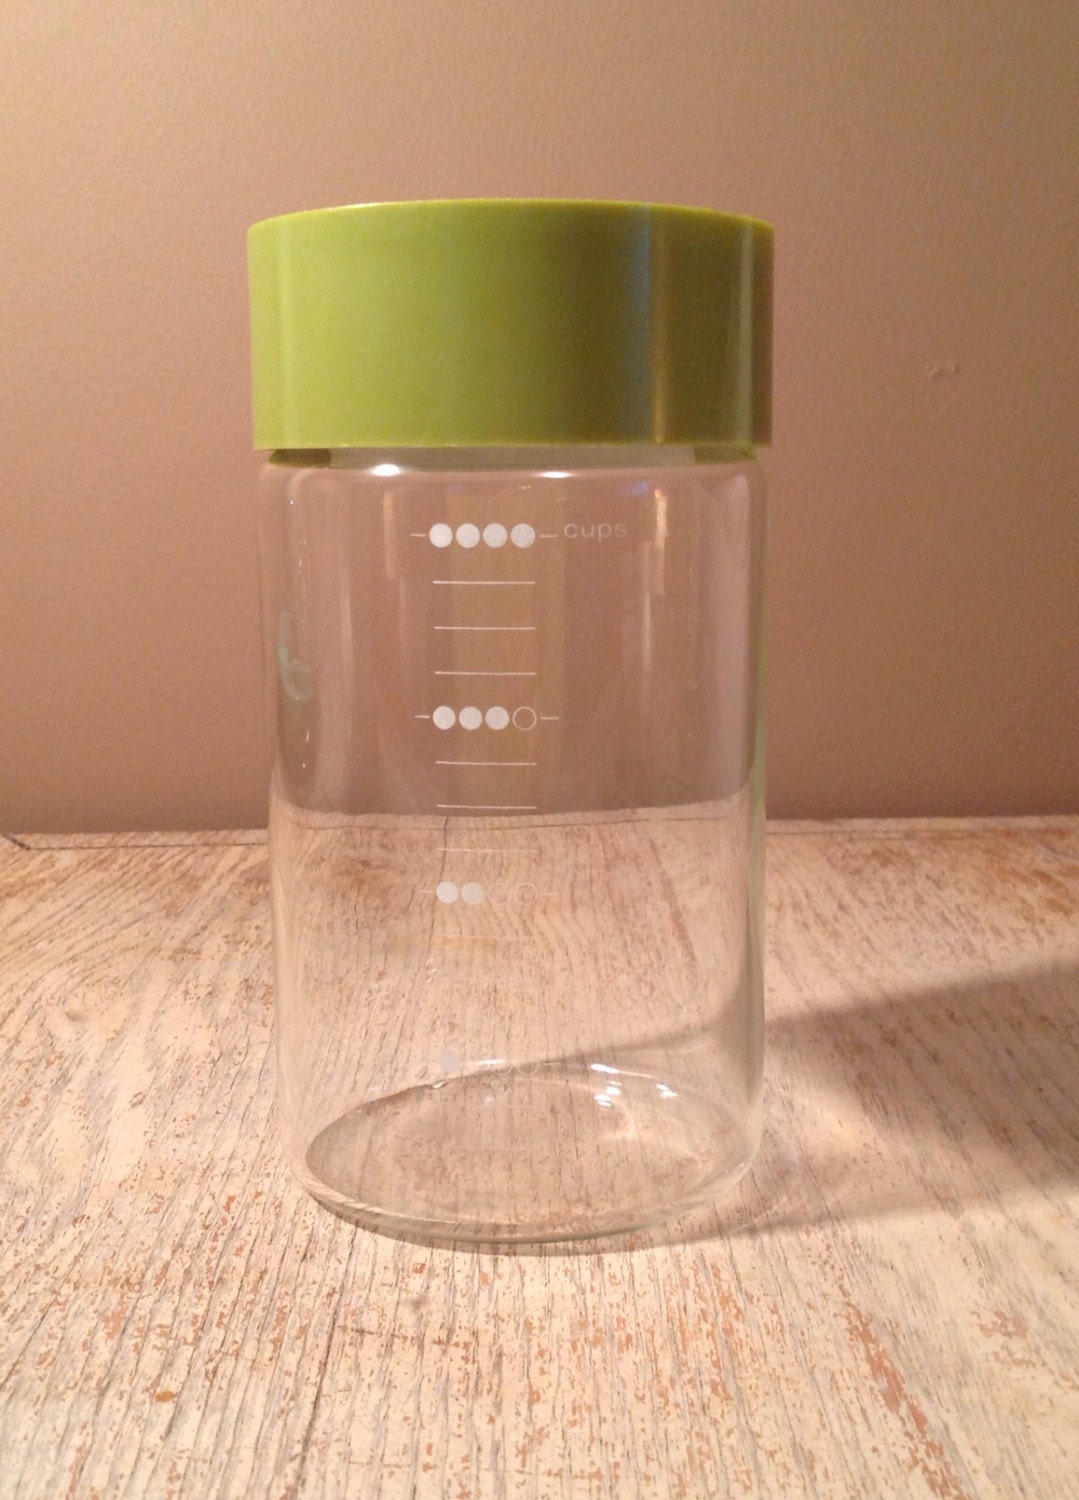 Vintage Pyrex Storage Canister with Measurements - Avocado Green Lid - 4 cup canister - PackandAlleys